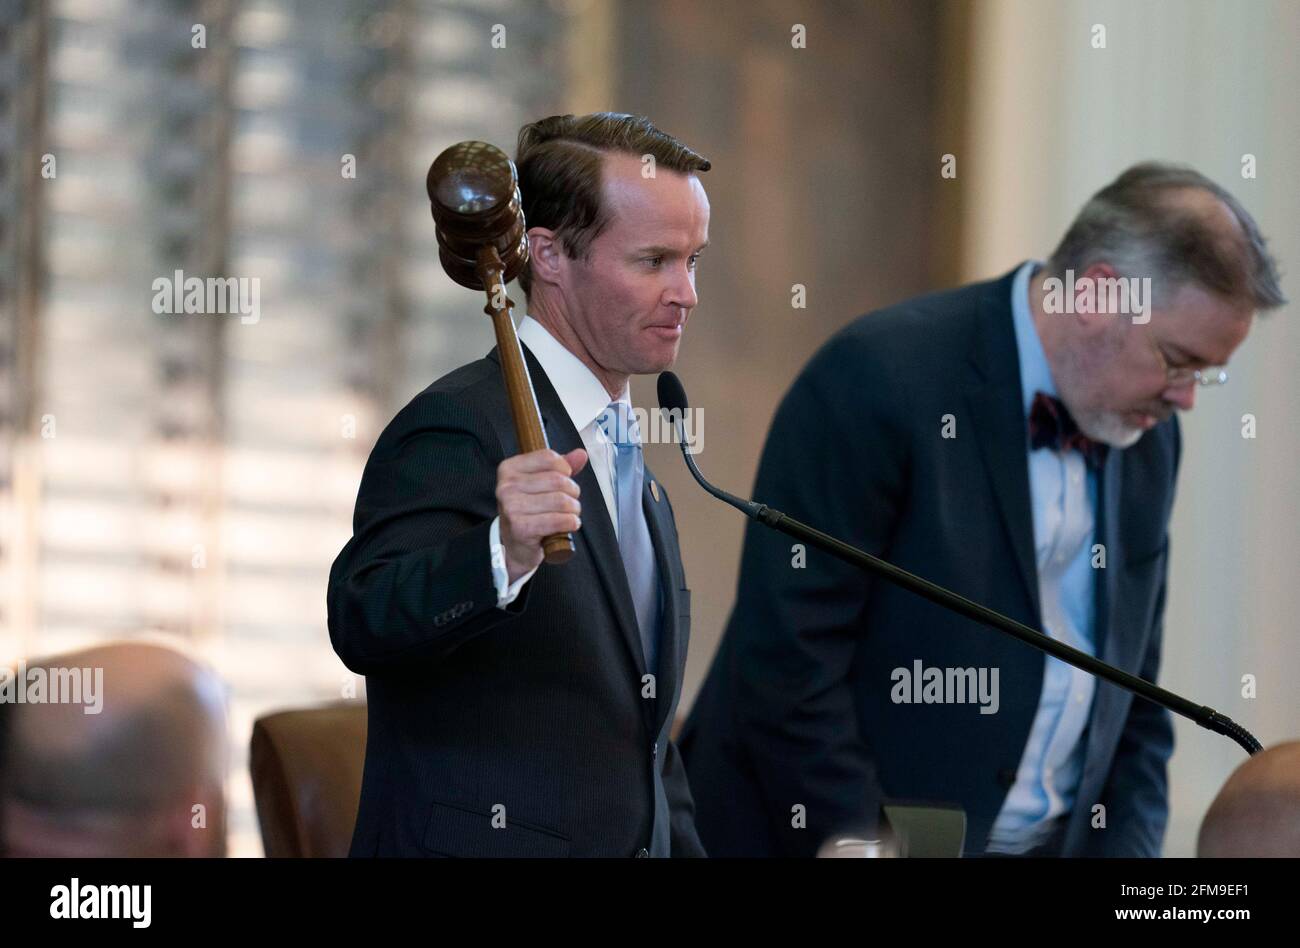 May 6, 2021, Austin, TX, United States: The Texas House debating SB 7 late into the night  a controversial omnibus elections bill that would make changes to the way Texas elections are held. House Speaker DADE PHELAN  keeps order on the floor. (Credit Image: © Bob Daemmrich/ZUMA Wire) Stock Photo